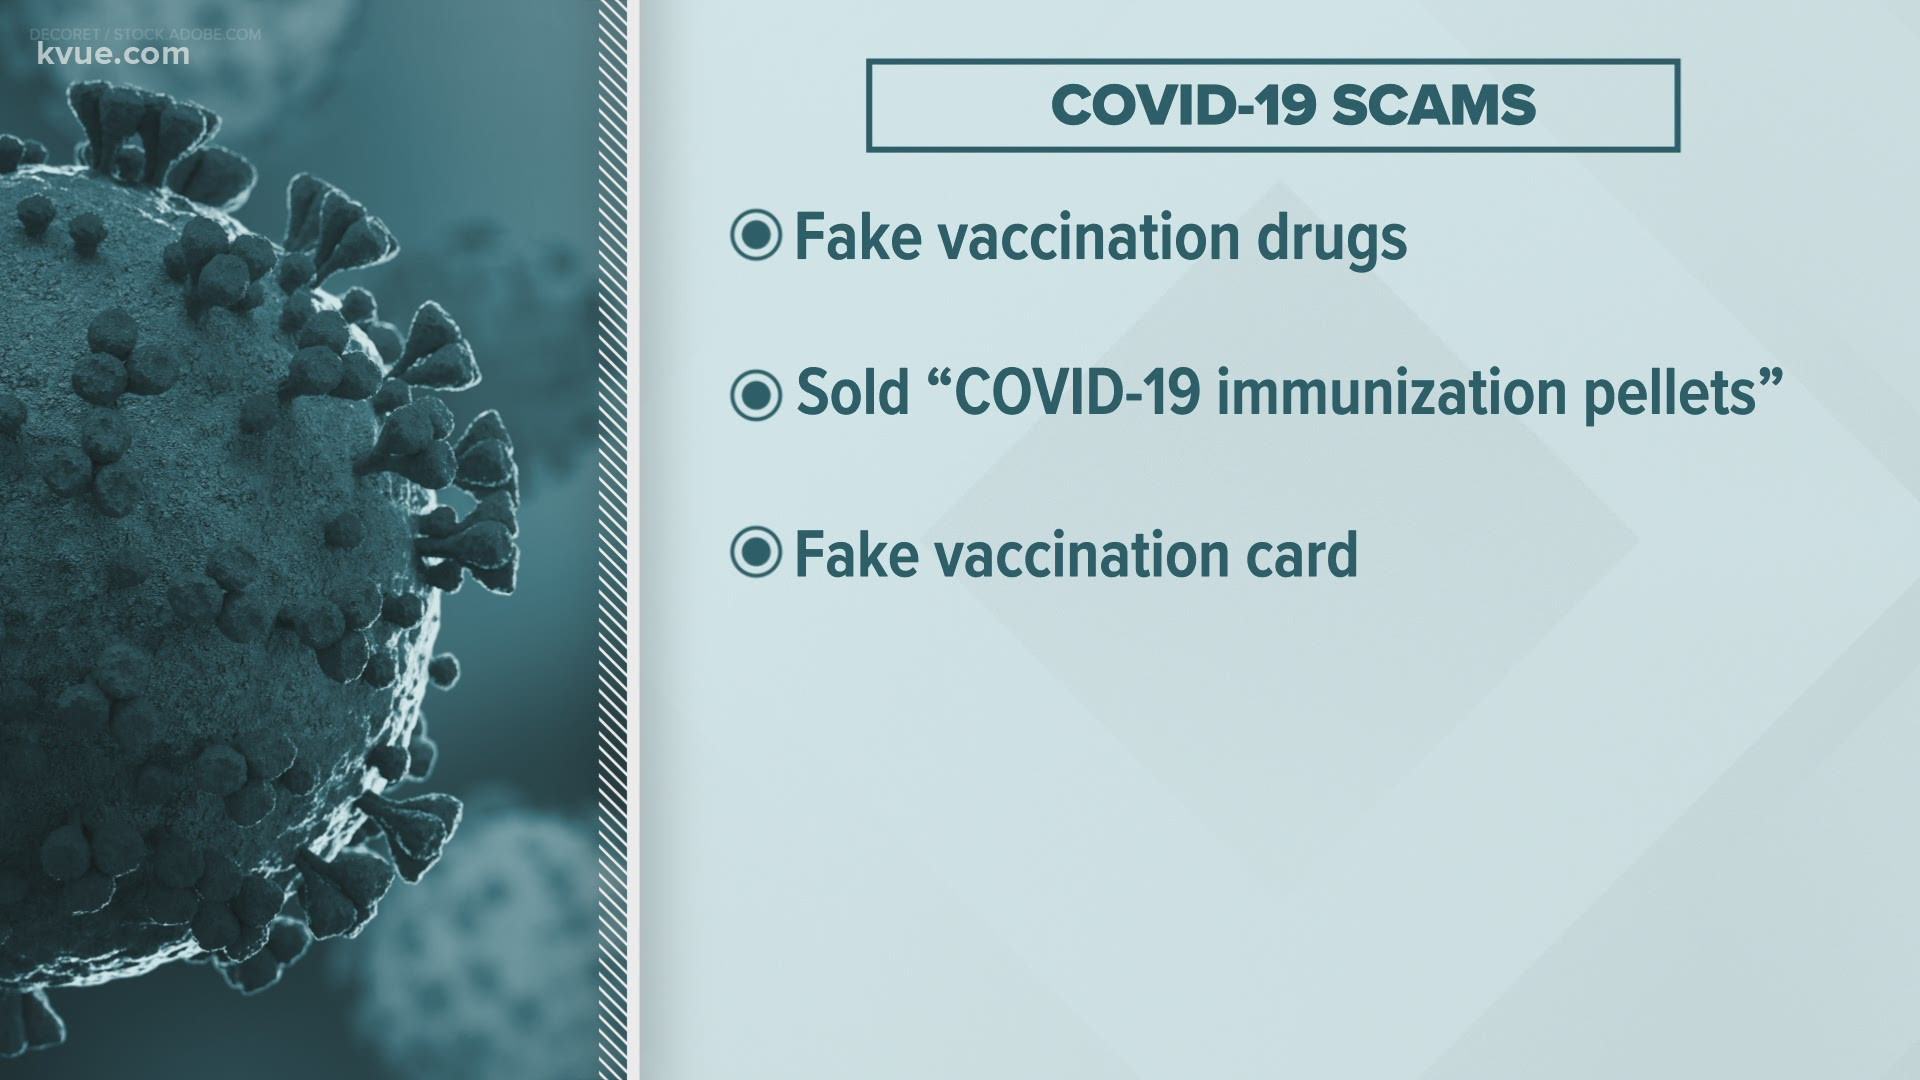 Watch out for COVID-19 scams. The KVUE Defenders found several ways thieves and con-artists try to get your money